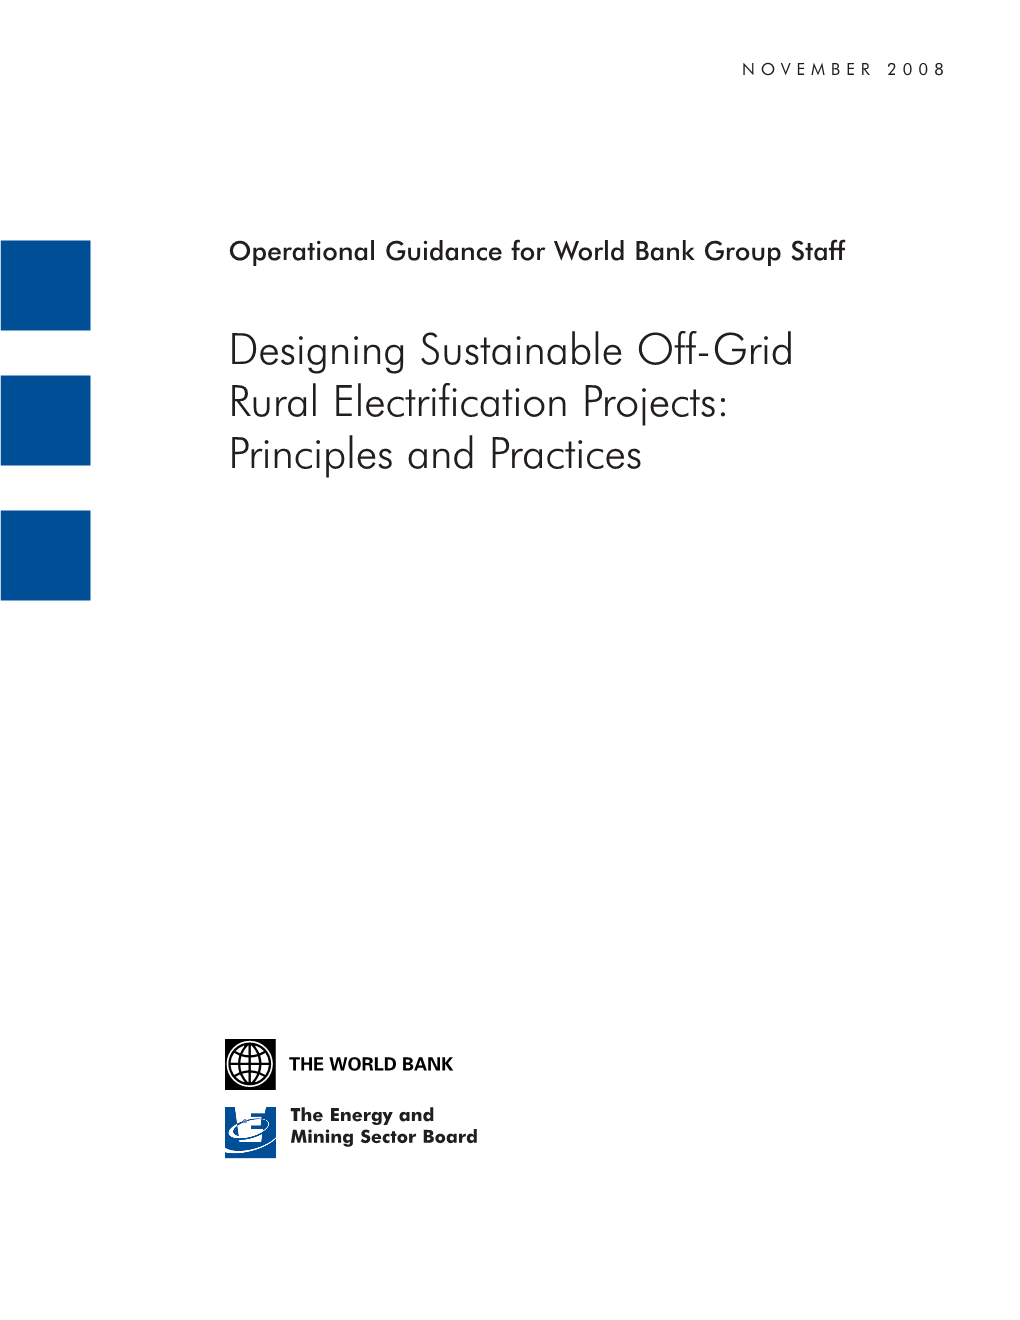 Designing Sustainable Off-Grid Rural Electrification Projects: Principles and Practices